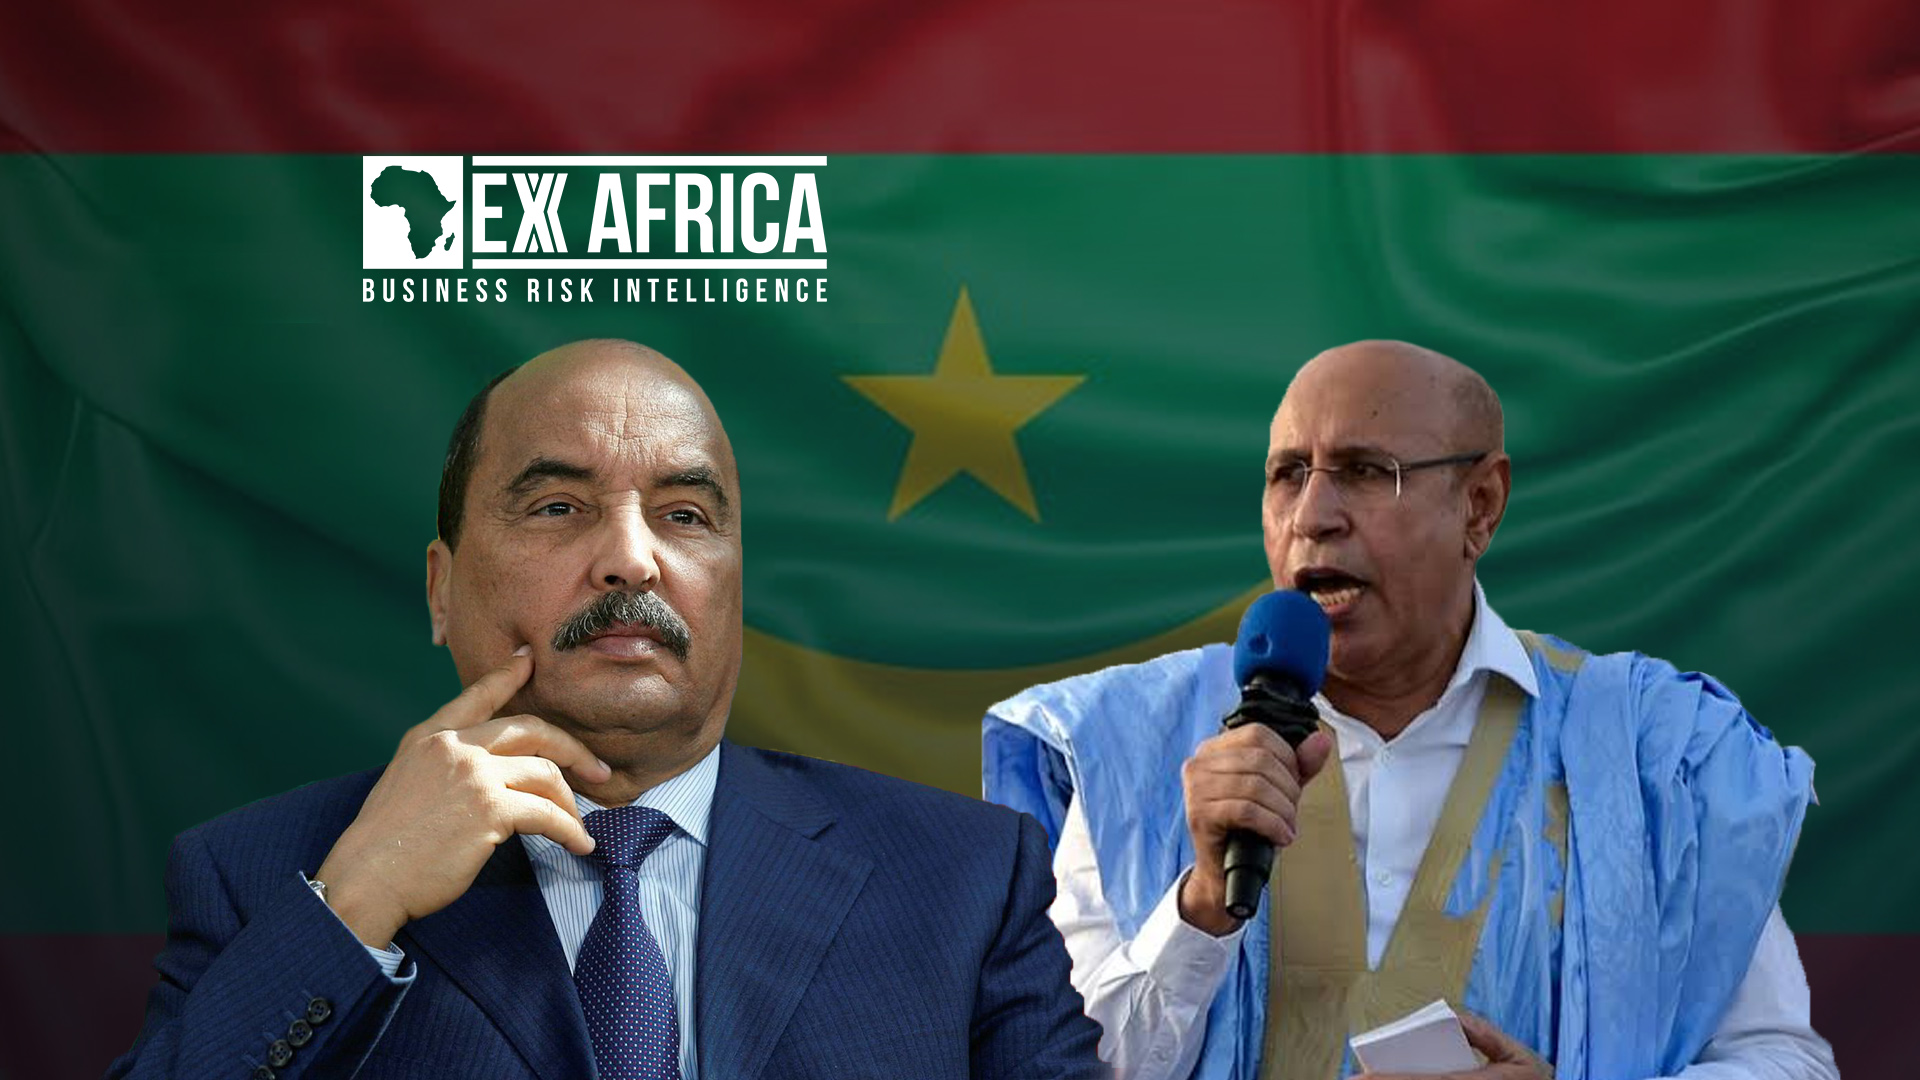 MAURITANIA: CURRENT AND FORMER PRESIDENTS BATTLE OVER POLITICAL INFLUENCE